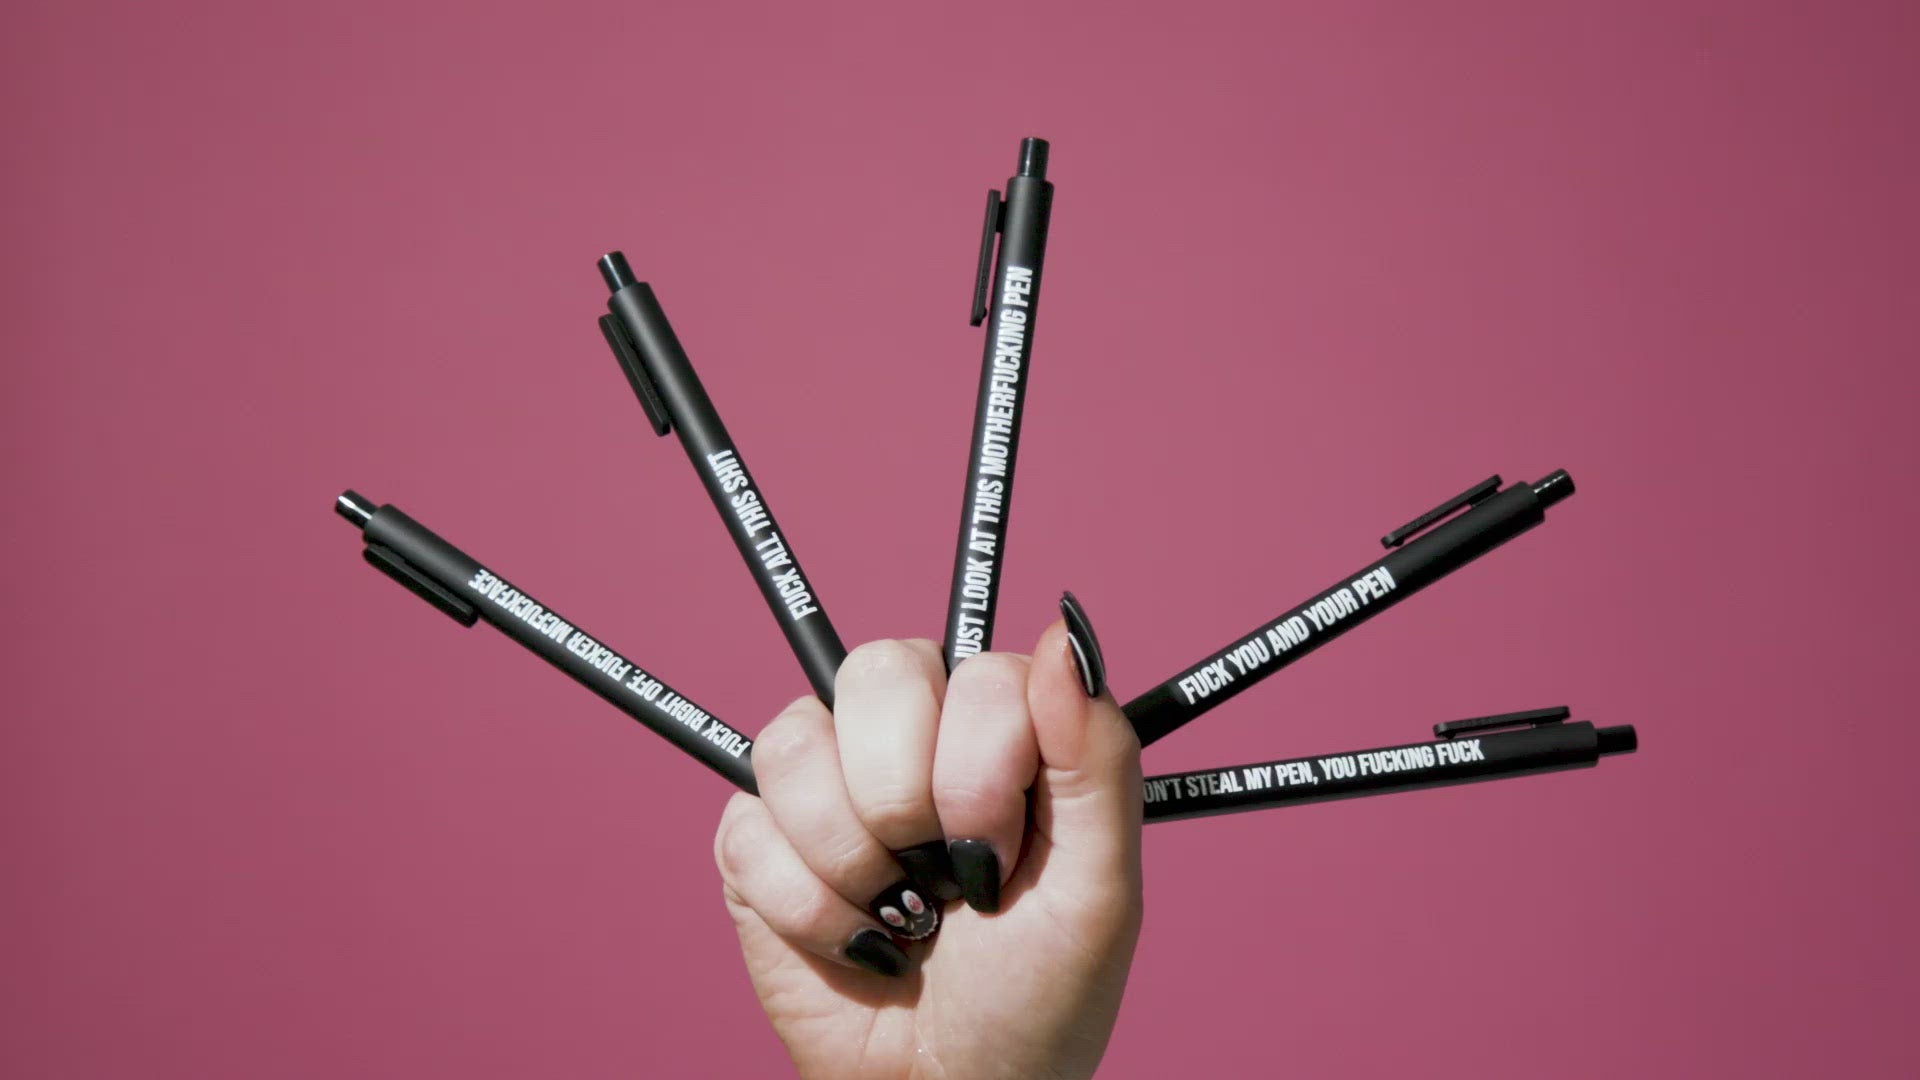 Sweary Fuck Pens Cussing Pen Gift Set - 5 Multicolored Gel Pens Rife with  Profanity